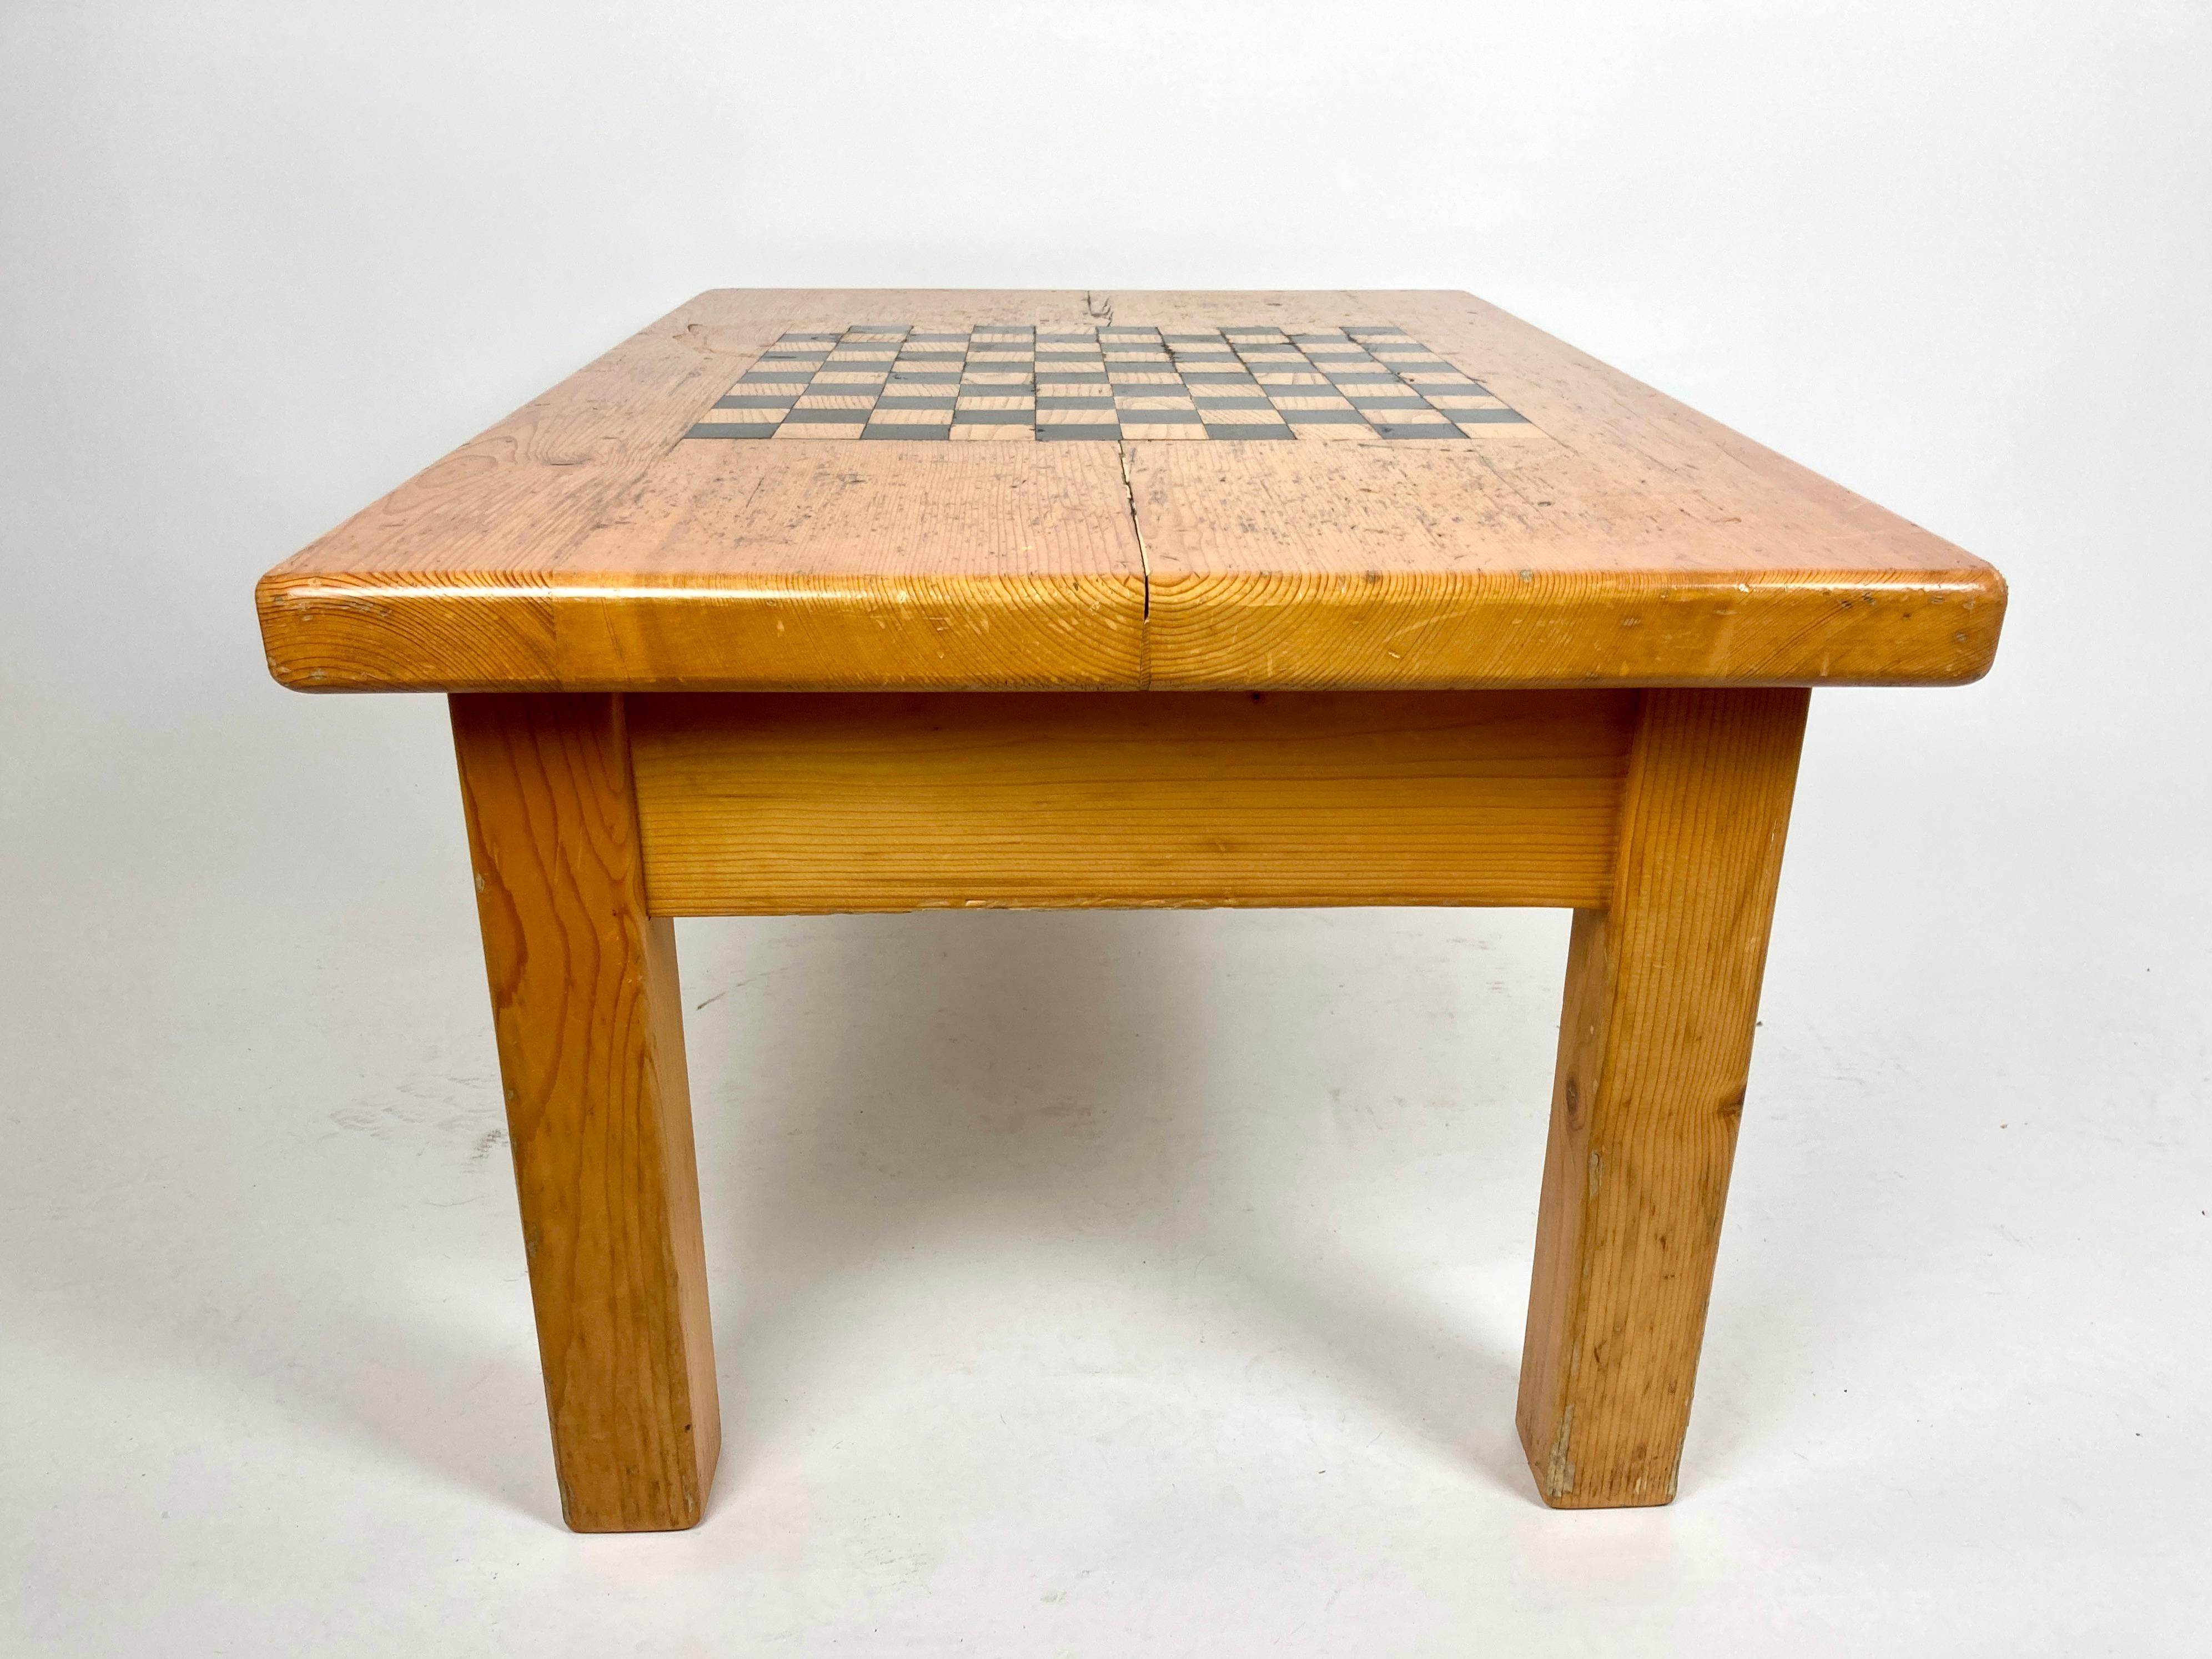 Vintage French Alpine Chalet Coffee Table with Inlaid Chequer Board 1